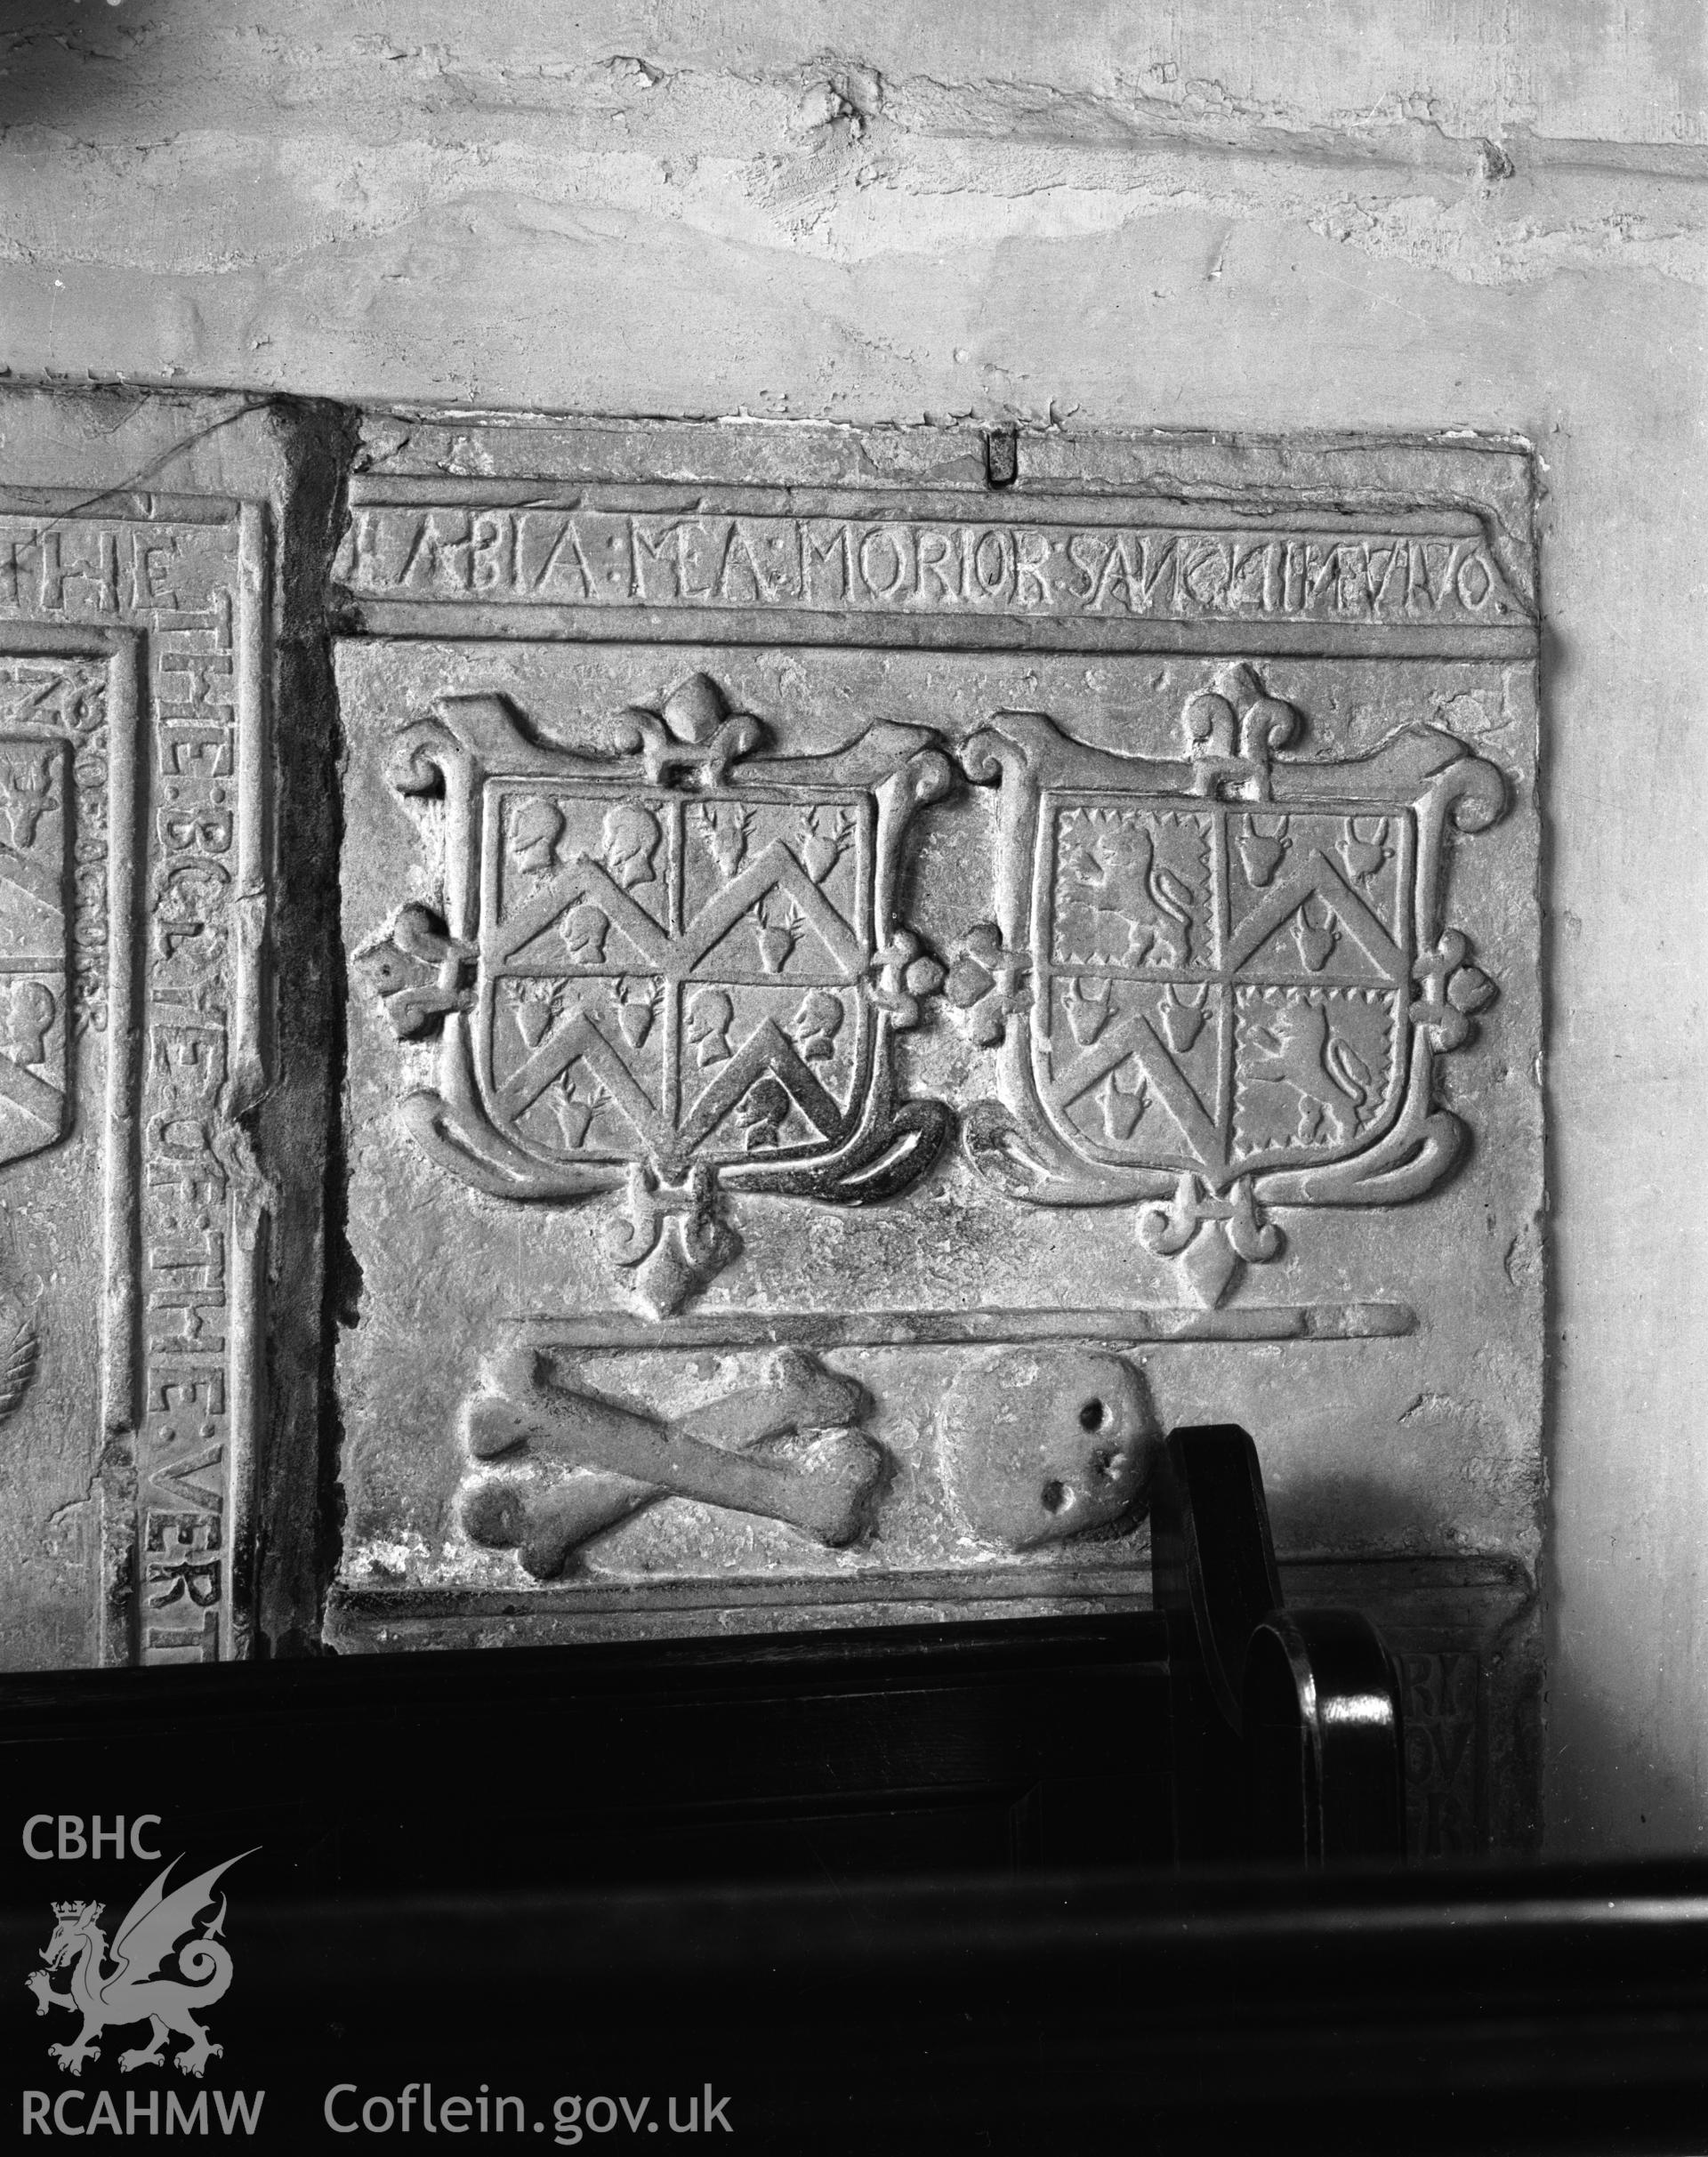 Interior view of St Marys Church Conwy showing crest on a tomb with skull and crossbones, taken in 10.09.1951.